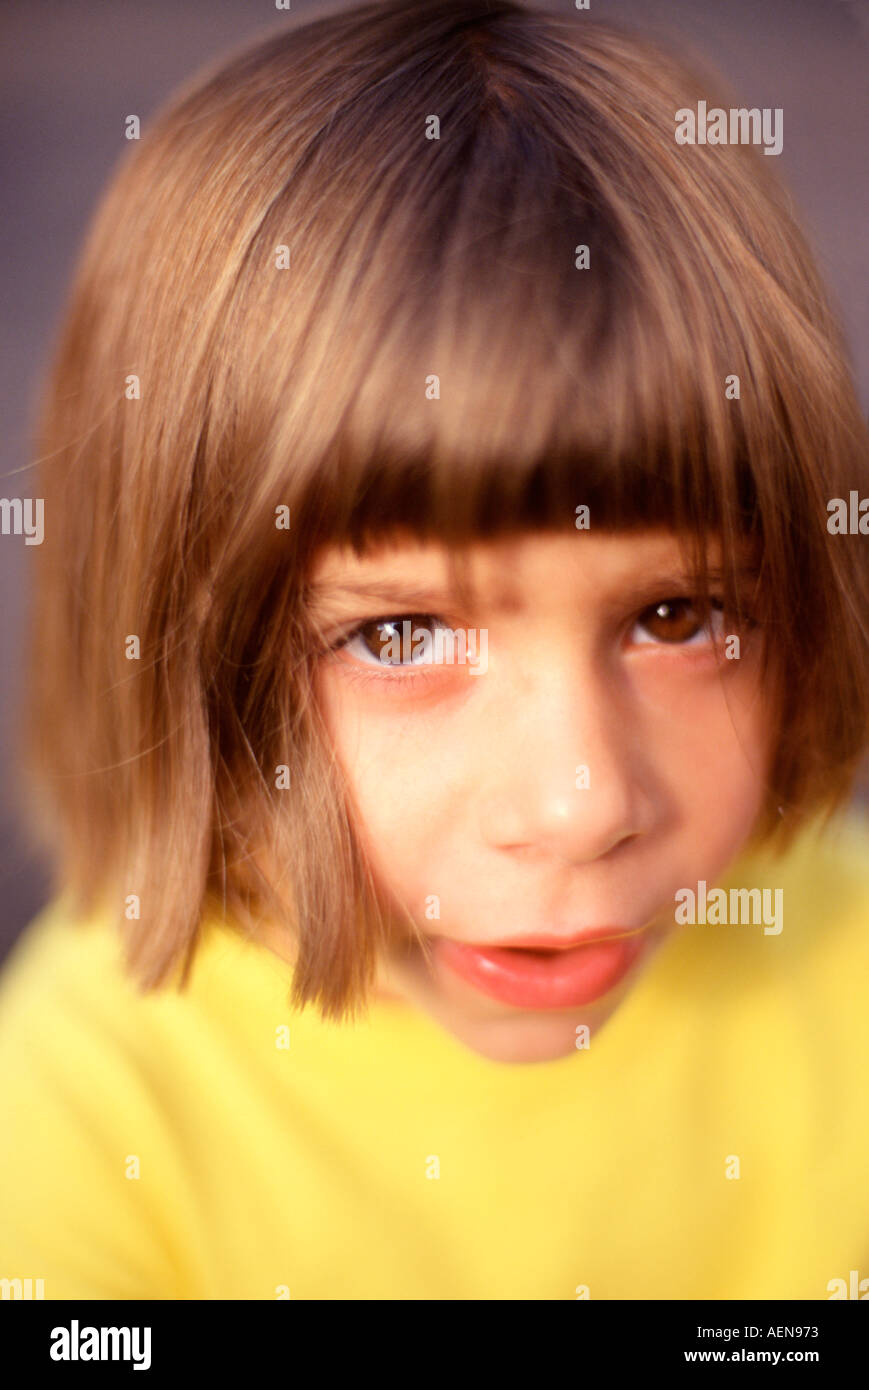 Five year old girl close up Stock Photo